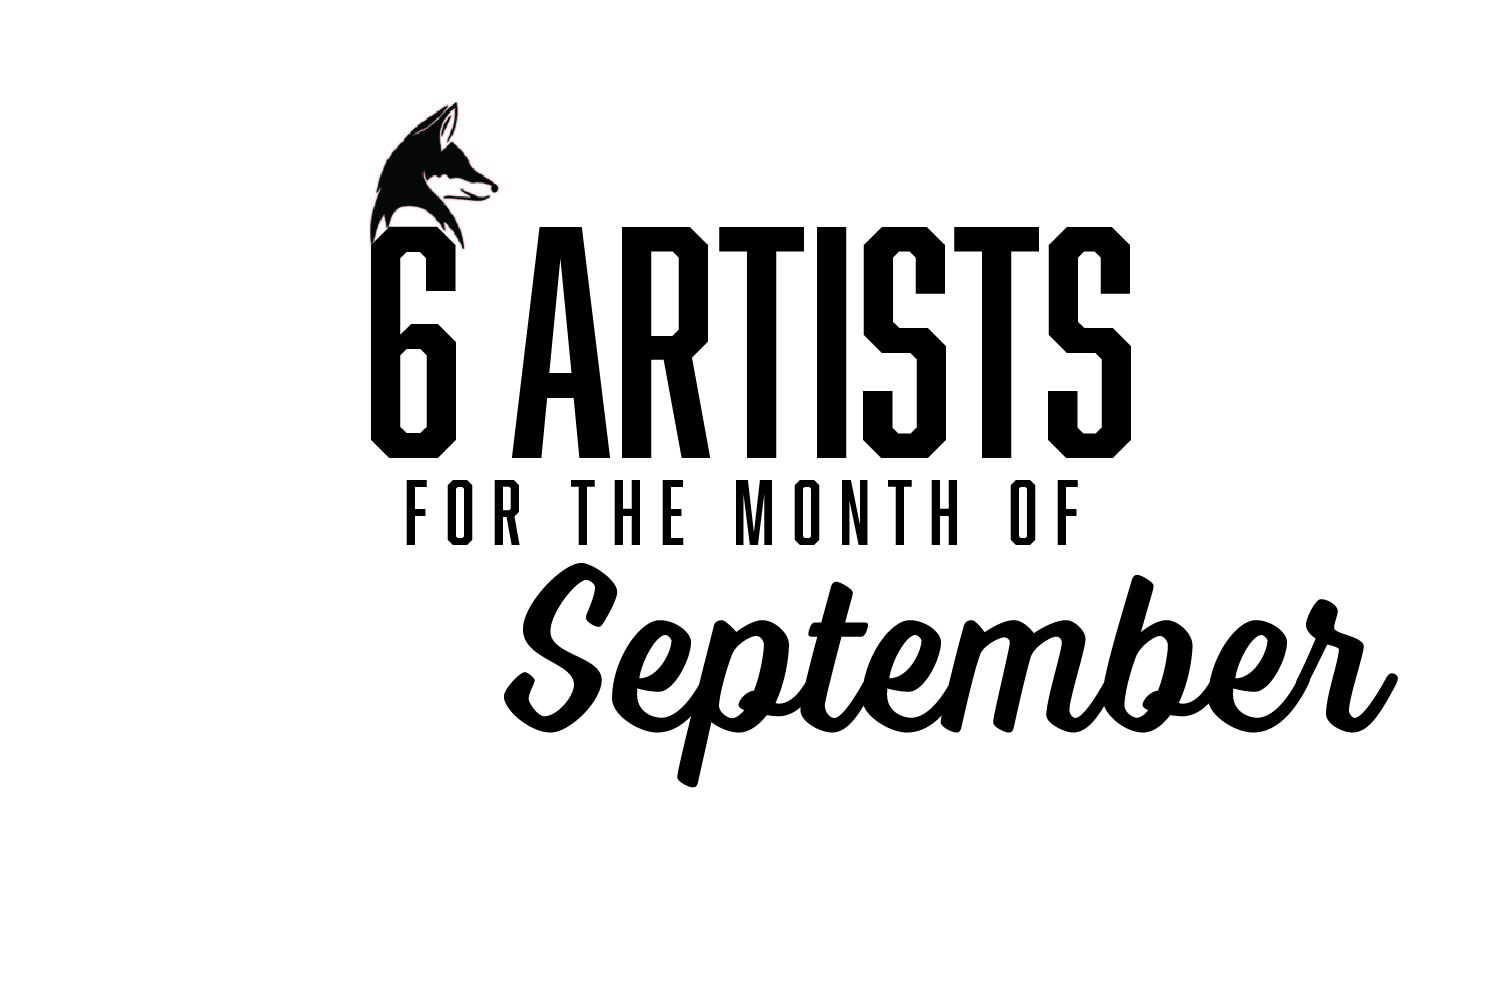 SIX ARTISTS YOU SHOULD BE LISTENING TO: SEPTEMBER 2022